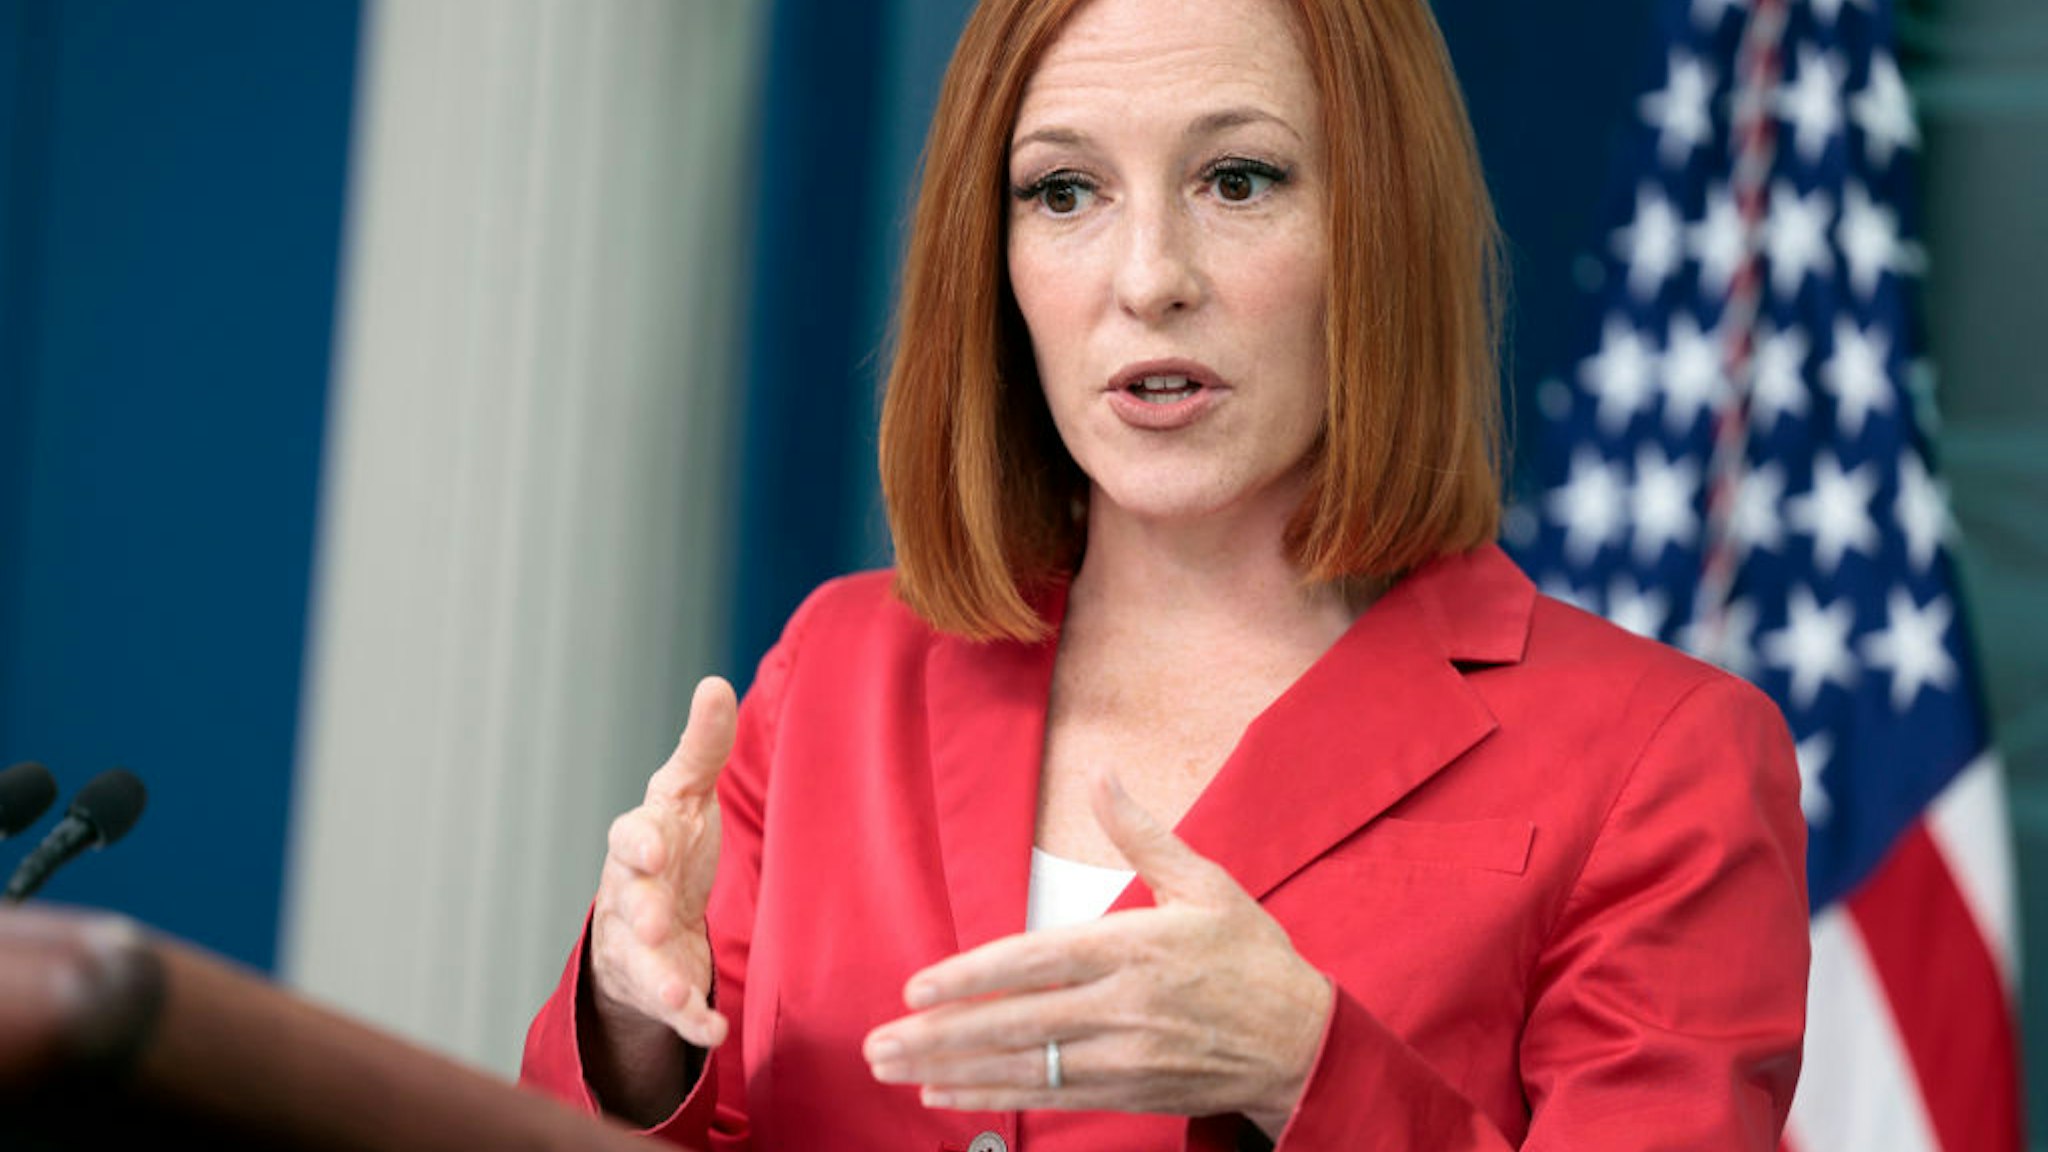 WASHINGTON, DC - APRIL 25: White House Press Secretary Jen Psaki speaks during a daily briefing in the James Brady Press Briefing Room of the White House on April 25, 2022 in Washington, DC. Psaki spoke on a range of topics including further COVID-19 relief legislation and reports of Elon Musk's acquisition of Twitter. (Photo by Anna Moneymaker/Getty Images)